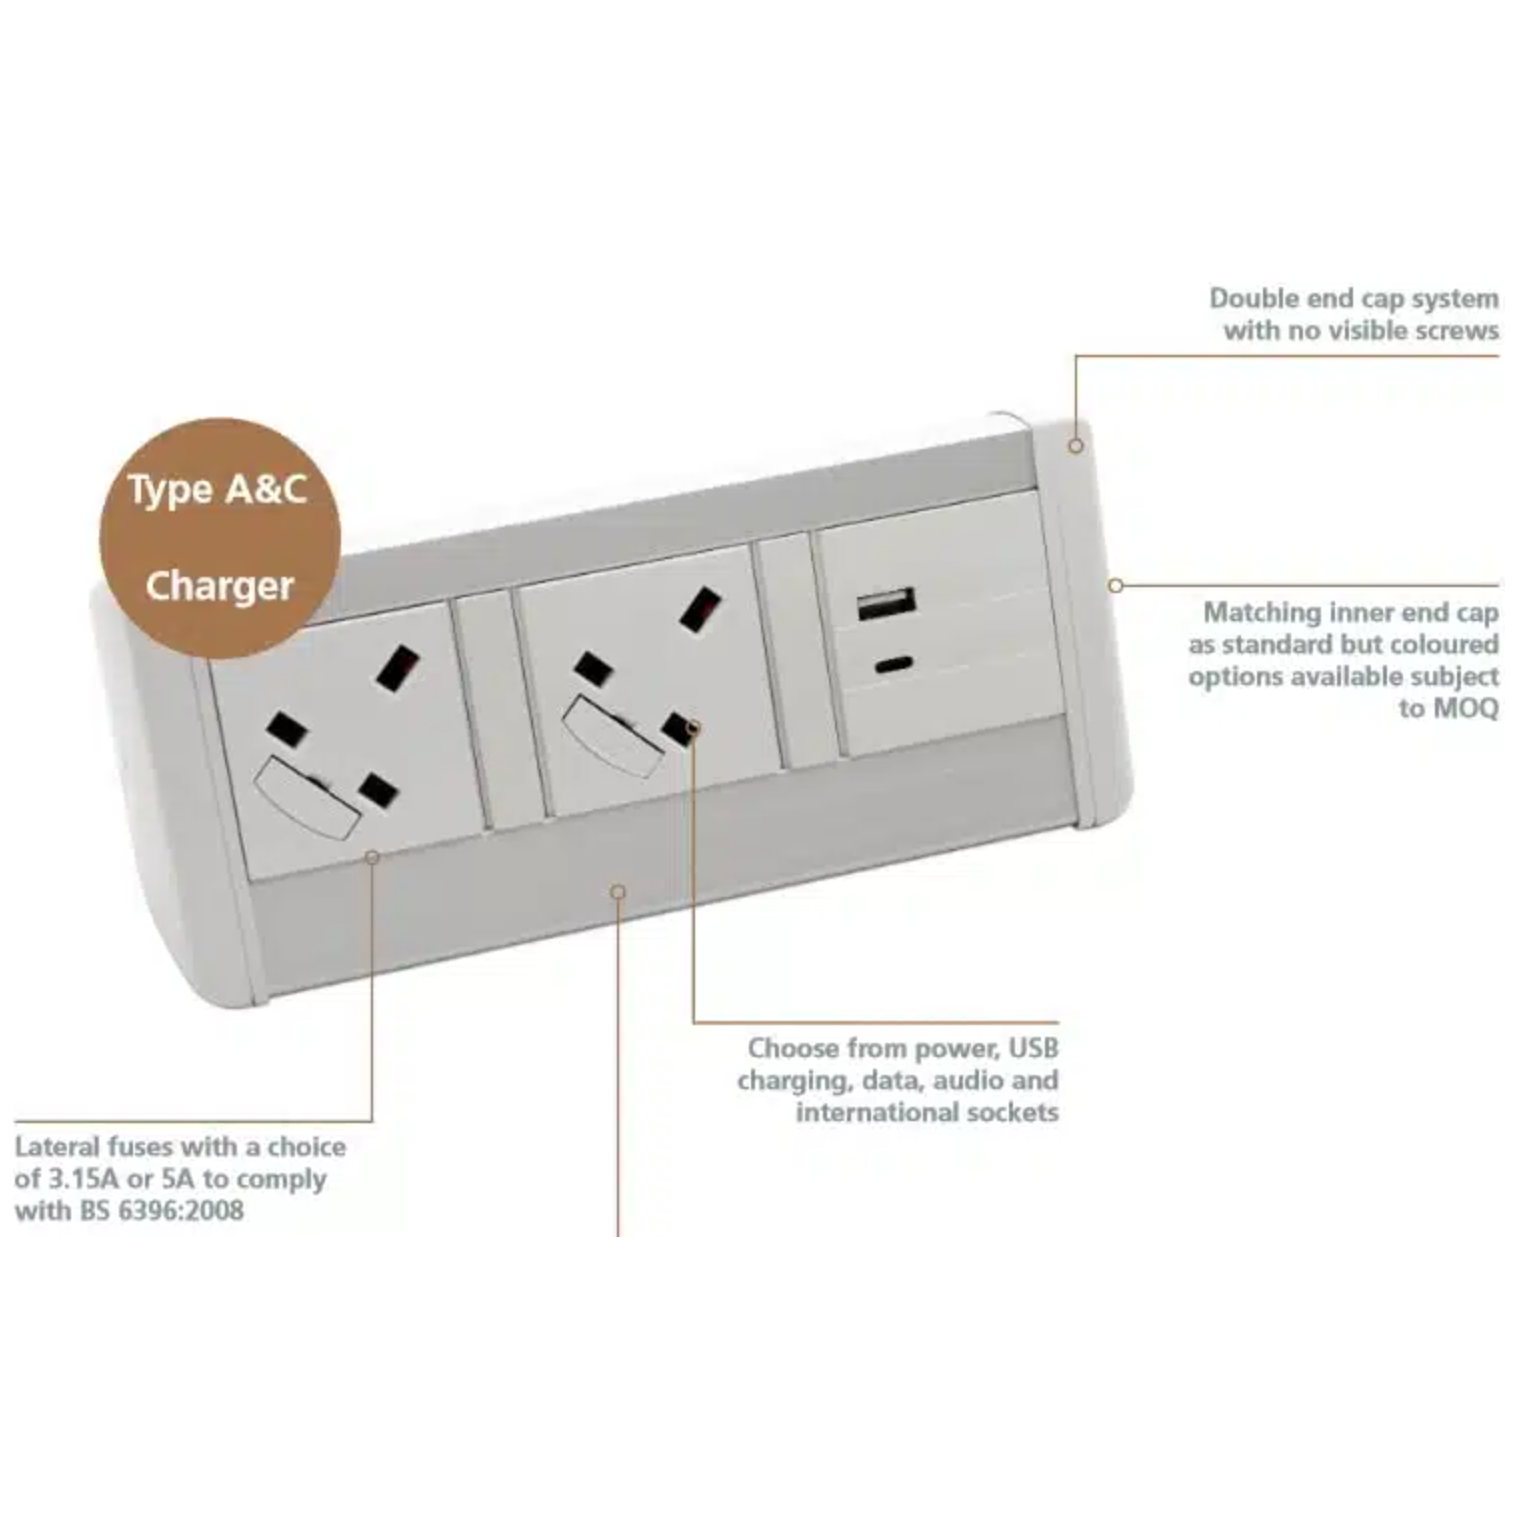 Harmony Desktop Power Module - 2 x power, 1 x twin USB Type A + Type C charger, 1m mains lead to 3-pole connector